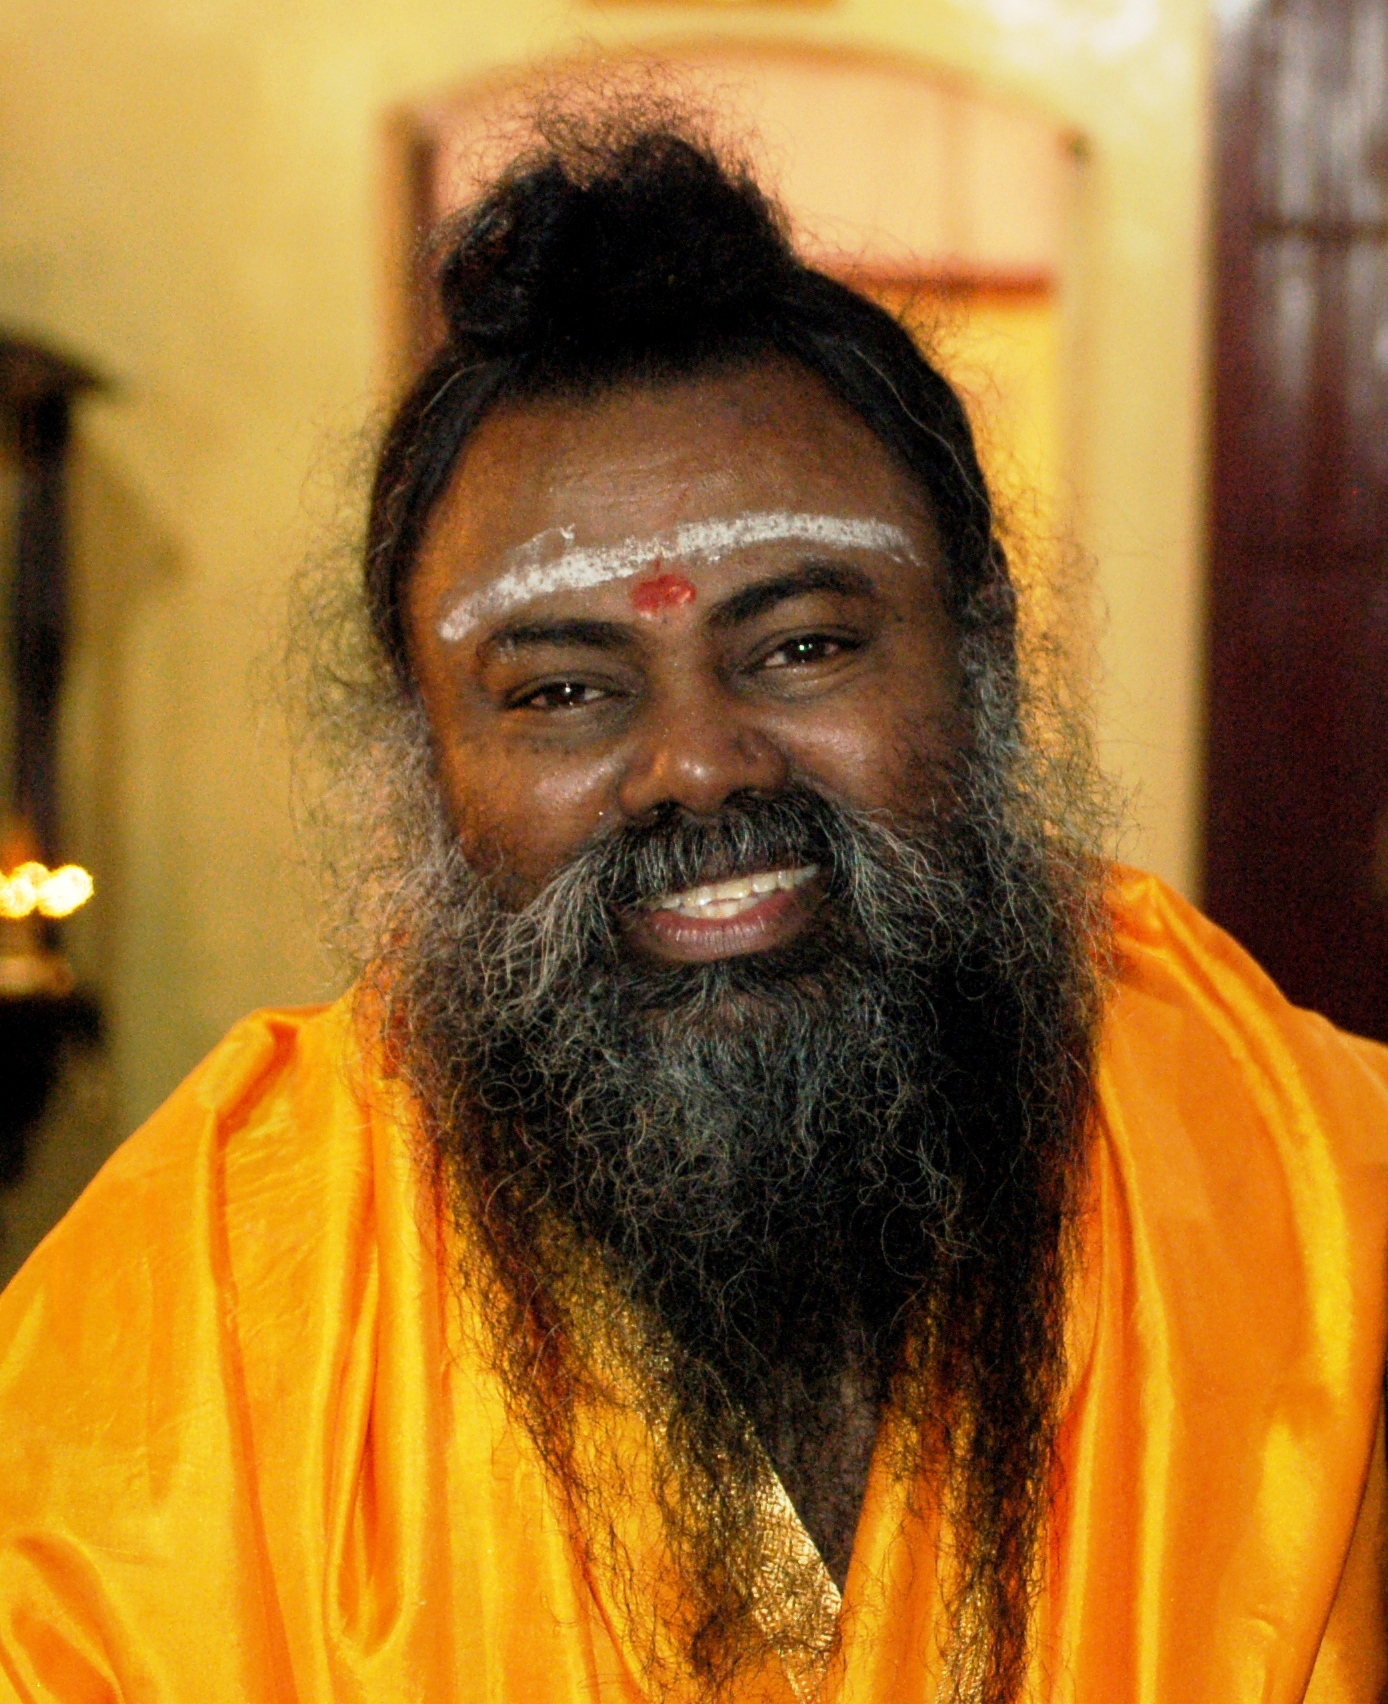 Cult Leader Swami Premananda wearing yellow outfit and smiling